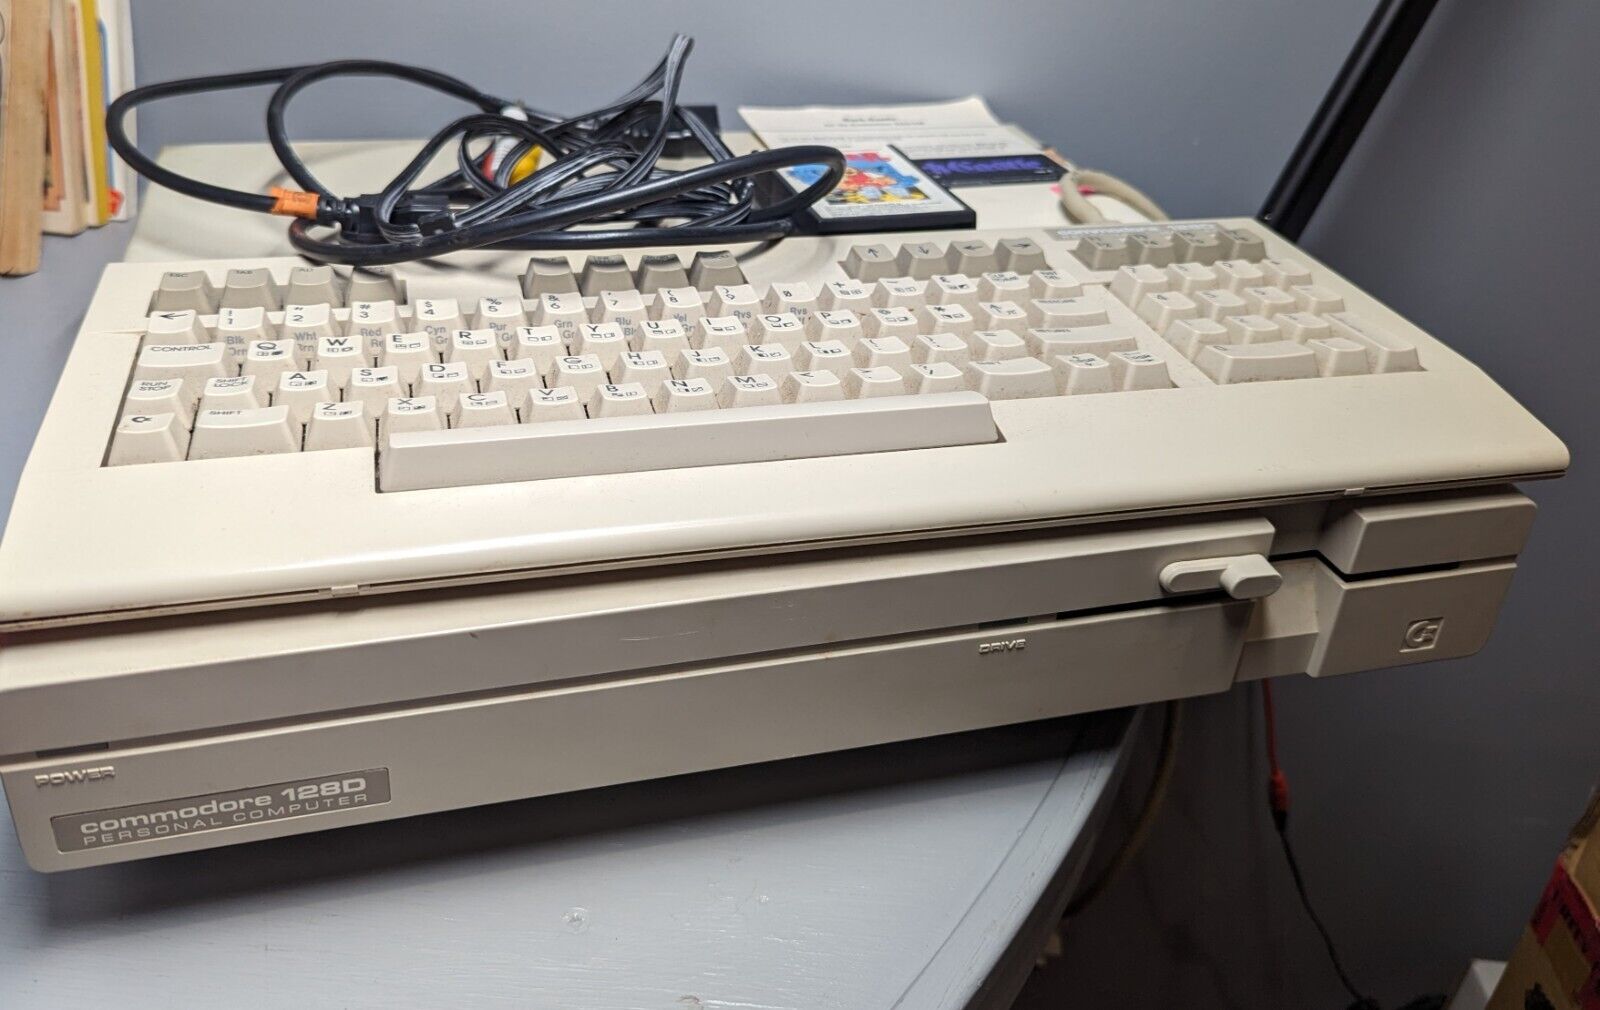 vintage Commodore 128d computer with keyboard, cords and game